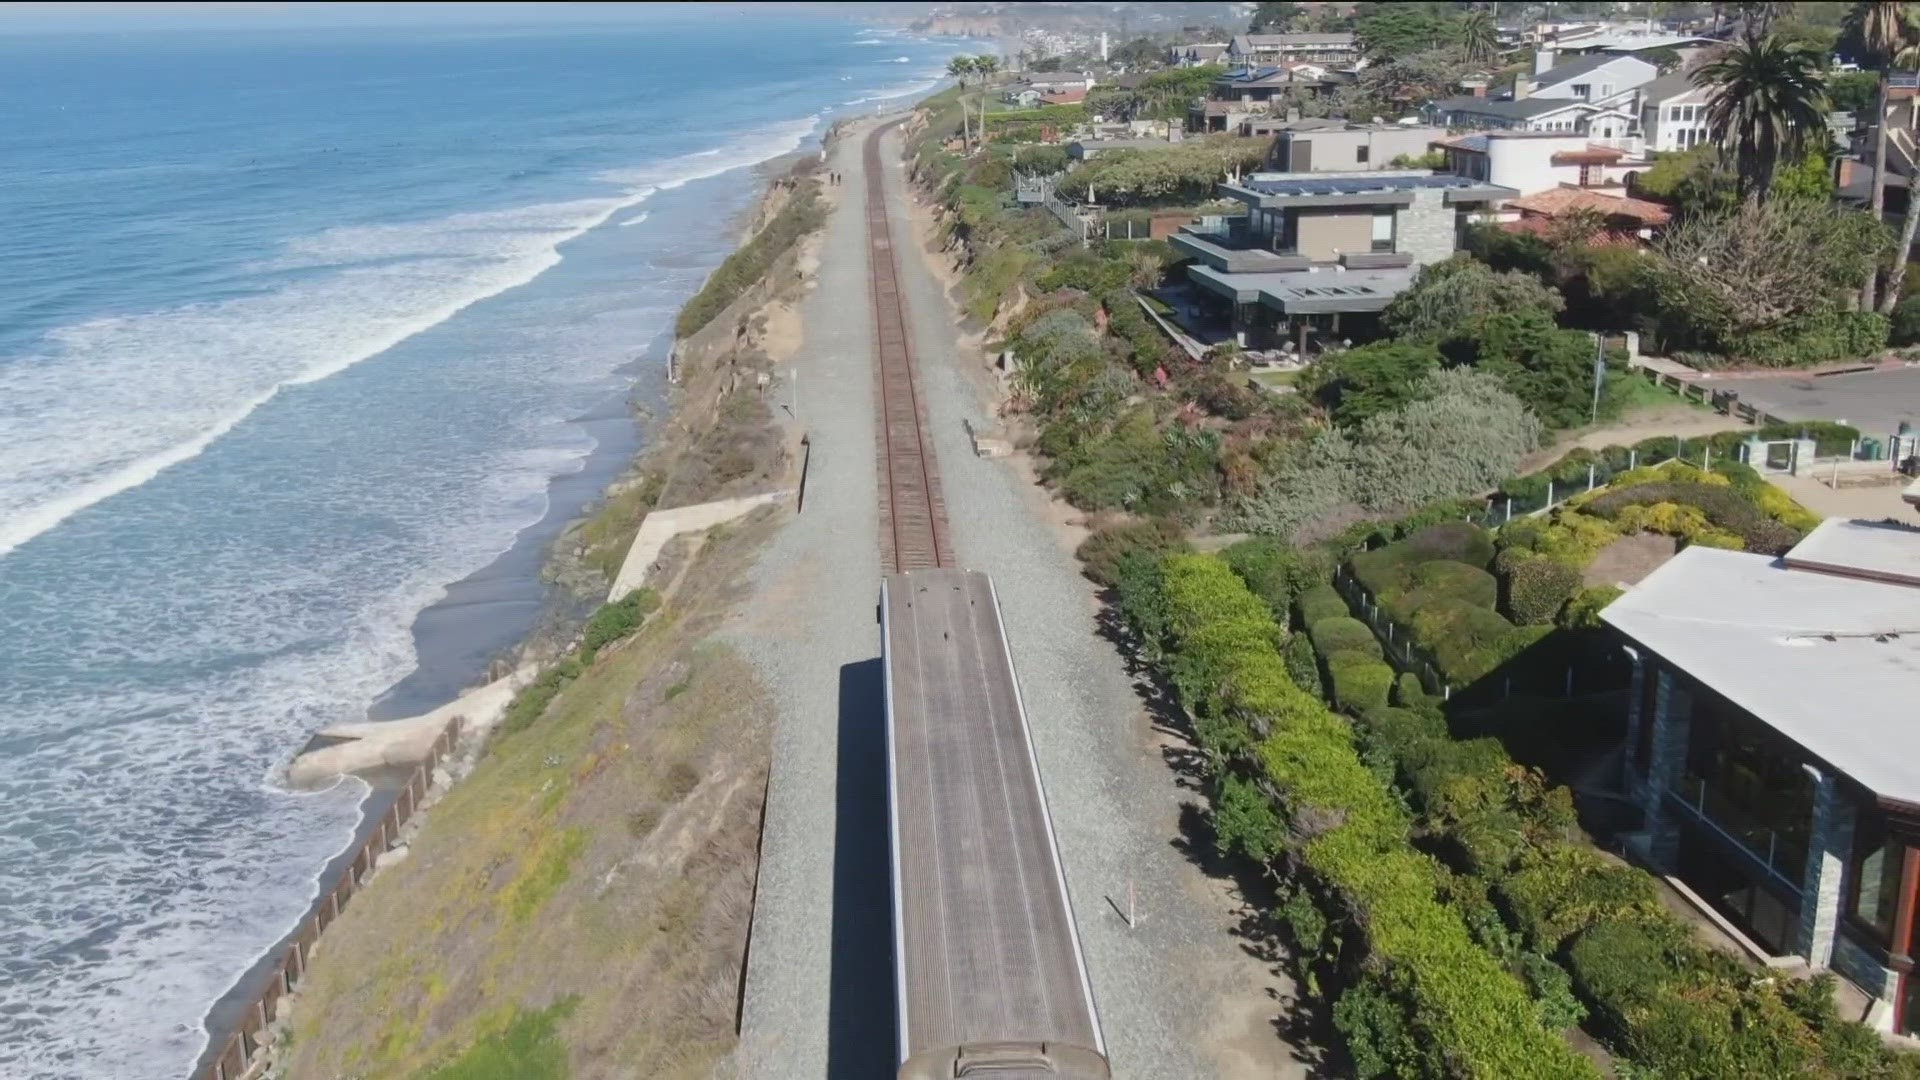 SANDAG looks to move tracks off eroding bluffs and is seeking public input.